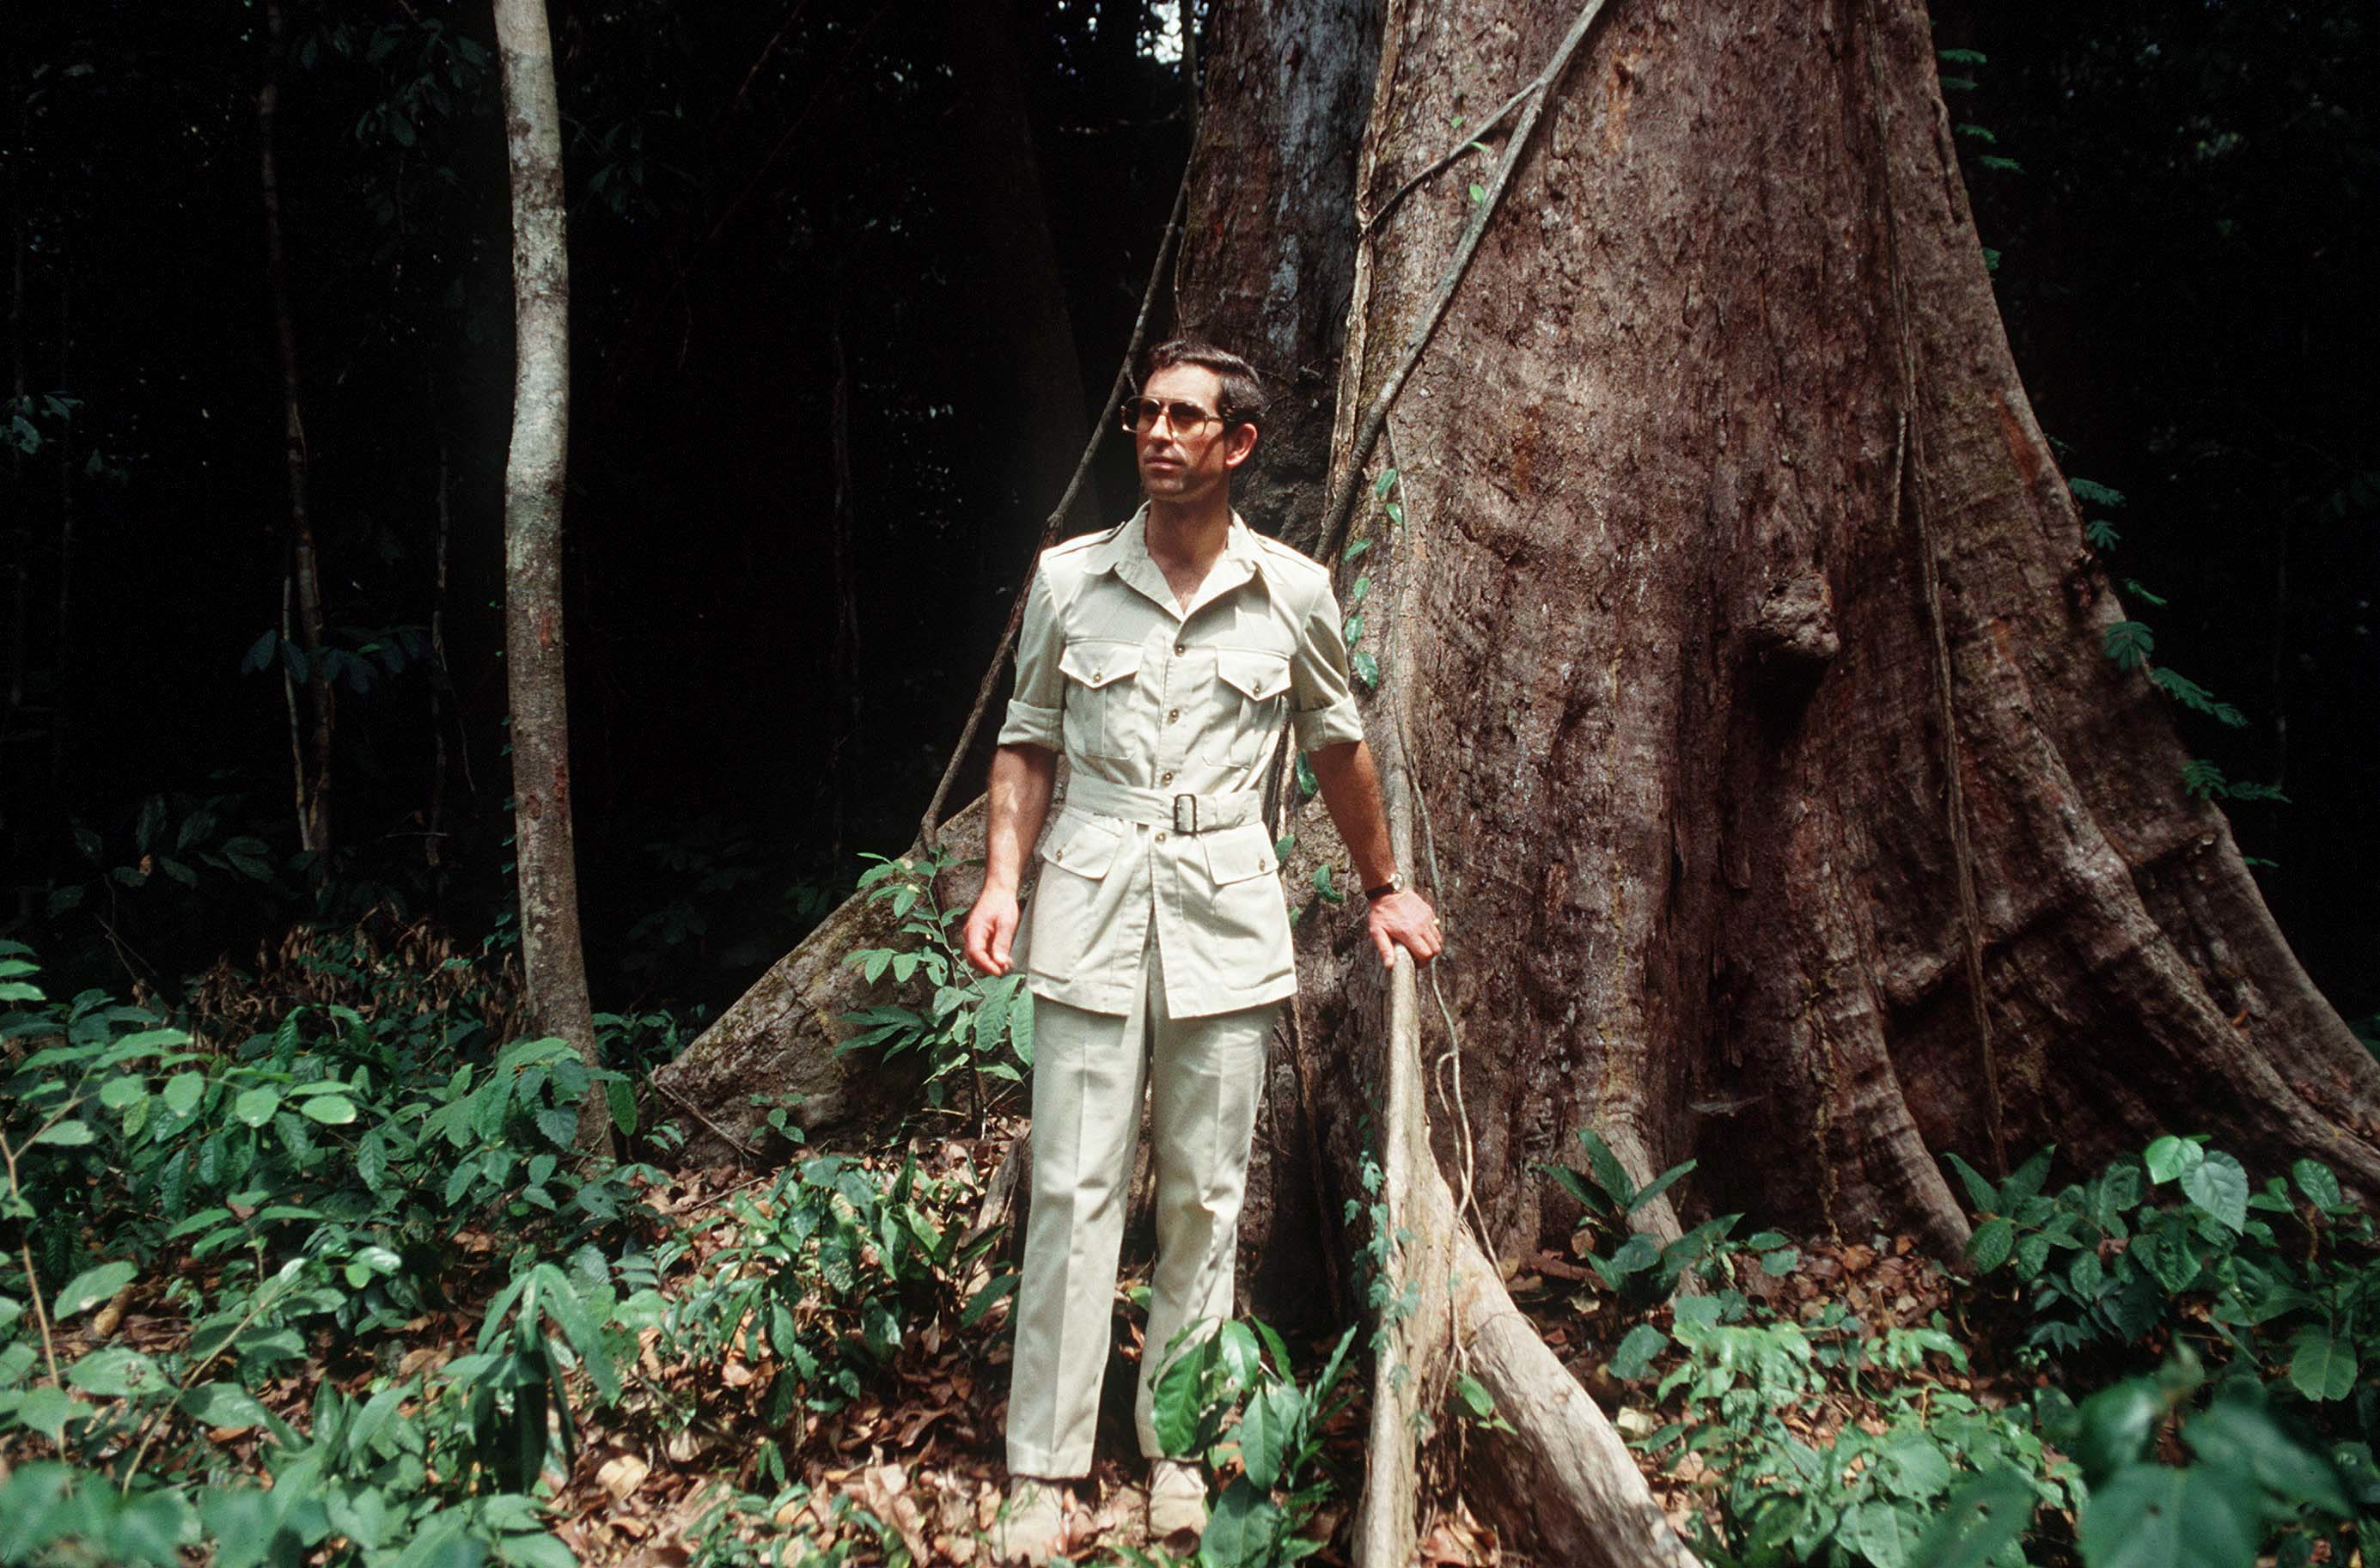 Prince Charles on a visit to a rainforest in Cameroon to raise awareness of deforestation in 1990. (Tim Graham —Getty Images)